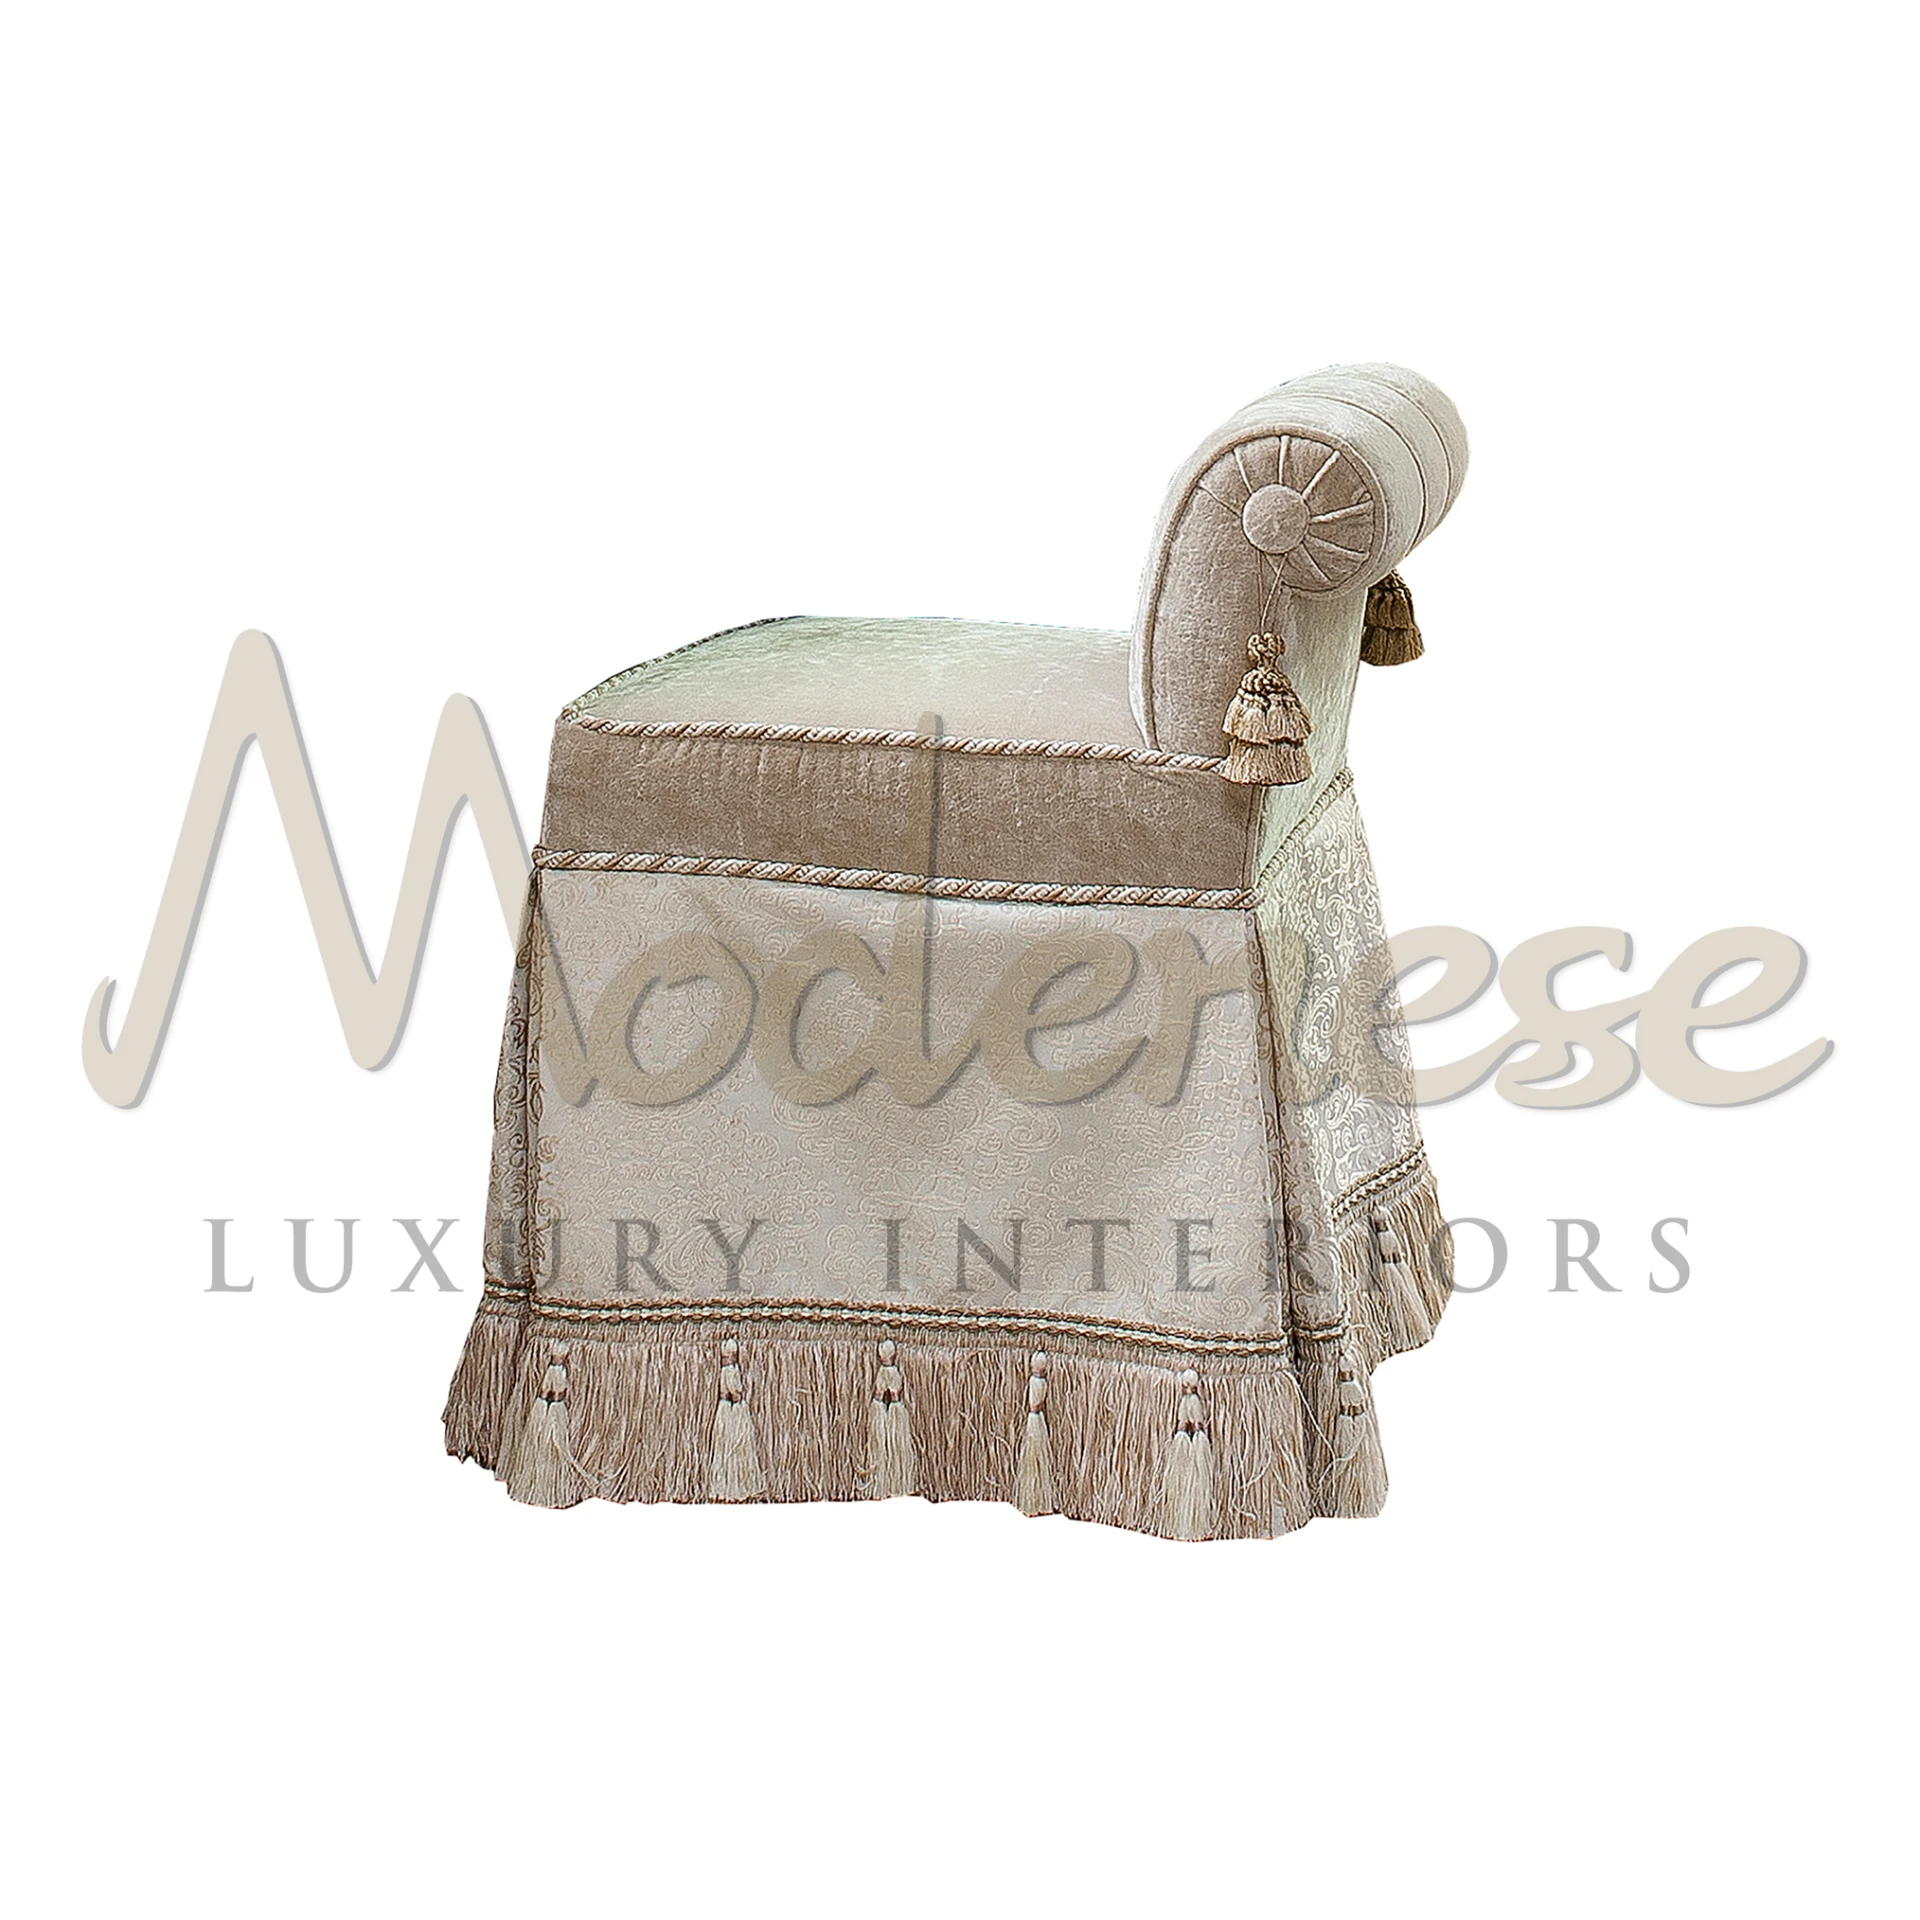 Enhance your living space with our Ivory Princess Stool, a symbol of refined luxury. Its timeless design and cozy cushioning make it a versatile piece, fit for both seating and decor.